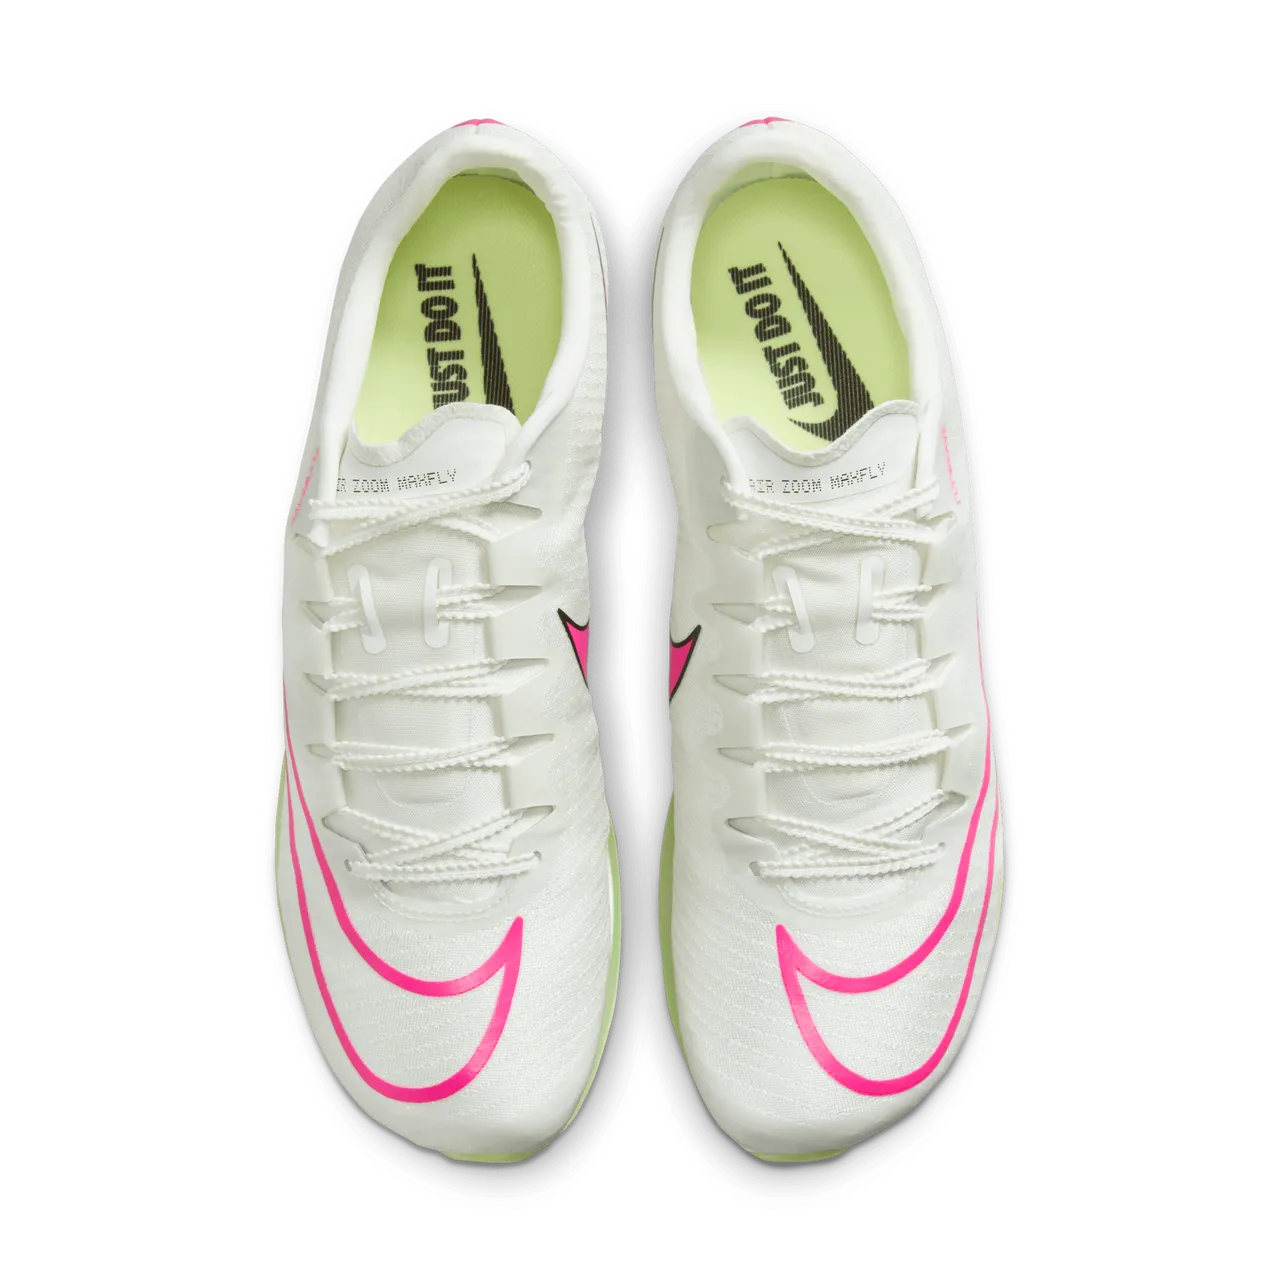 Nike Air Zoom Maxfly Athletics Sprinting Spikes - White